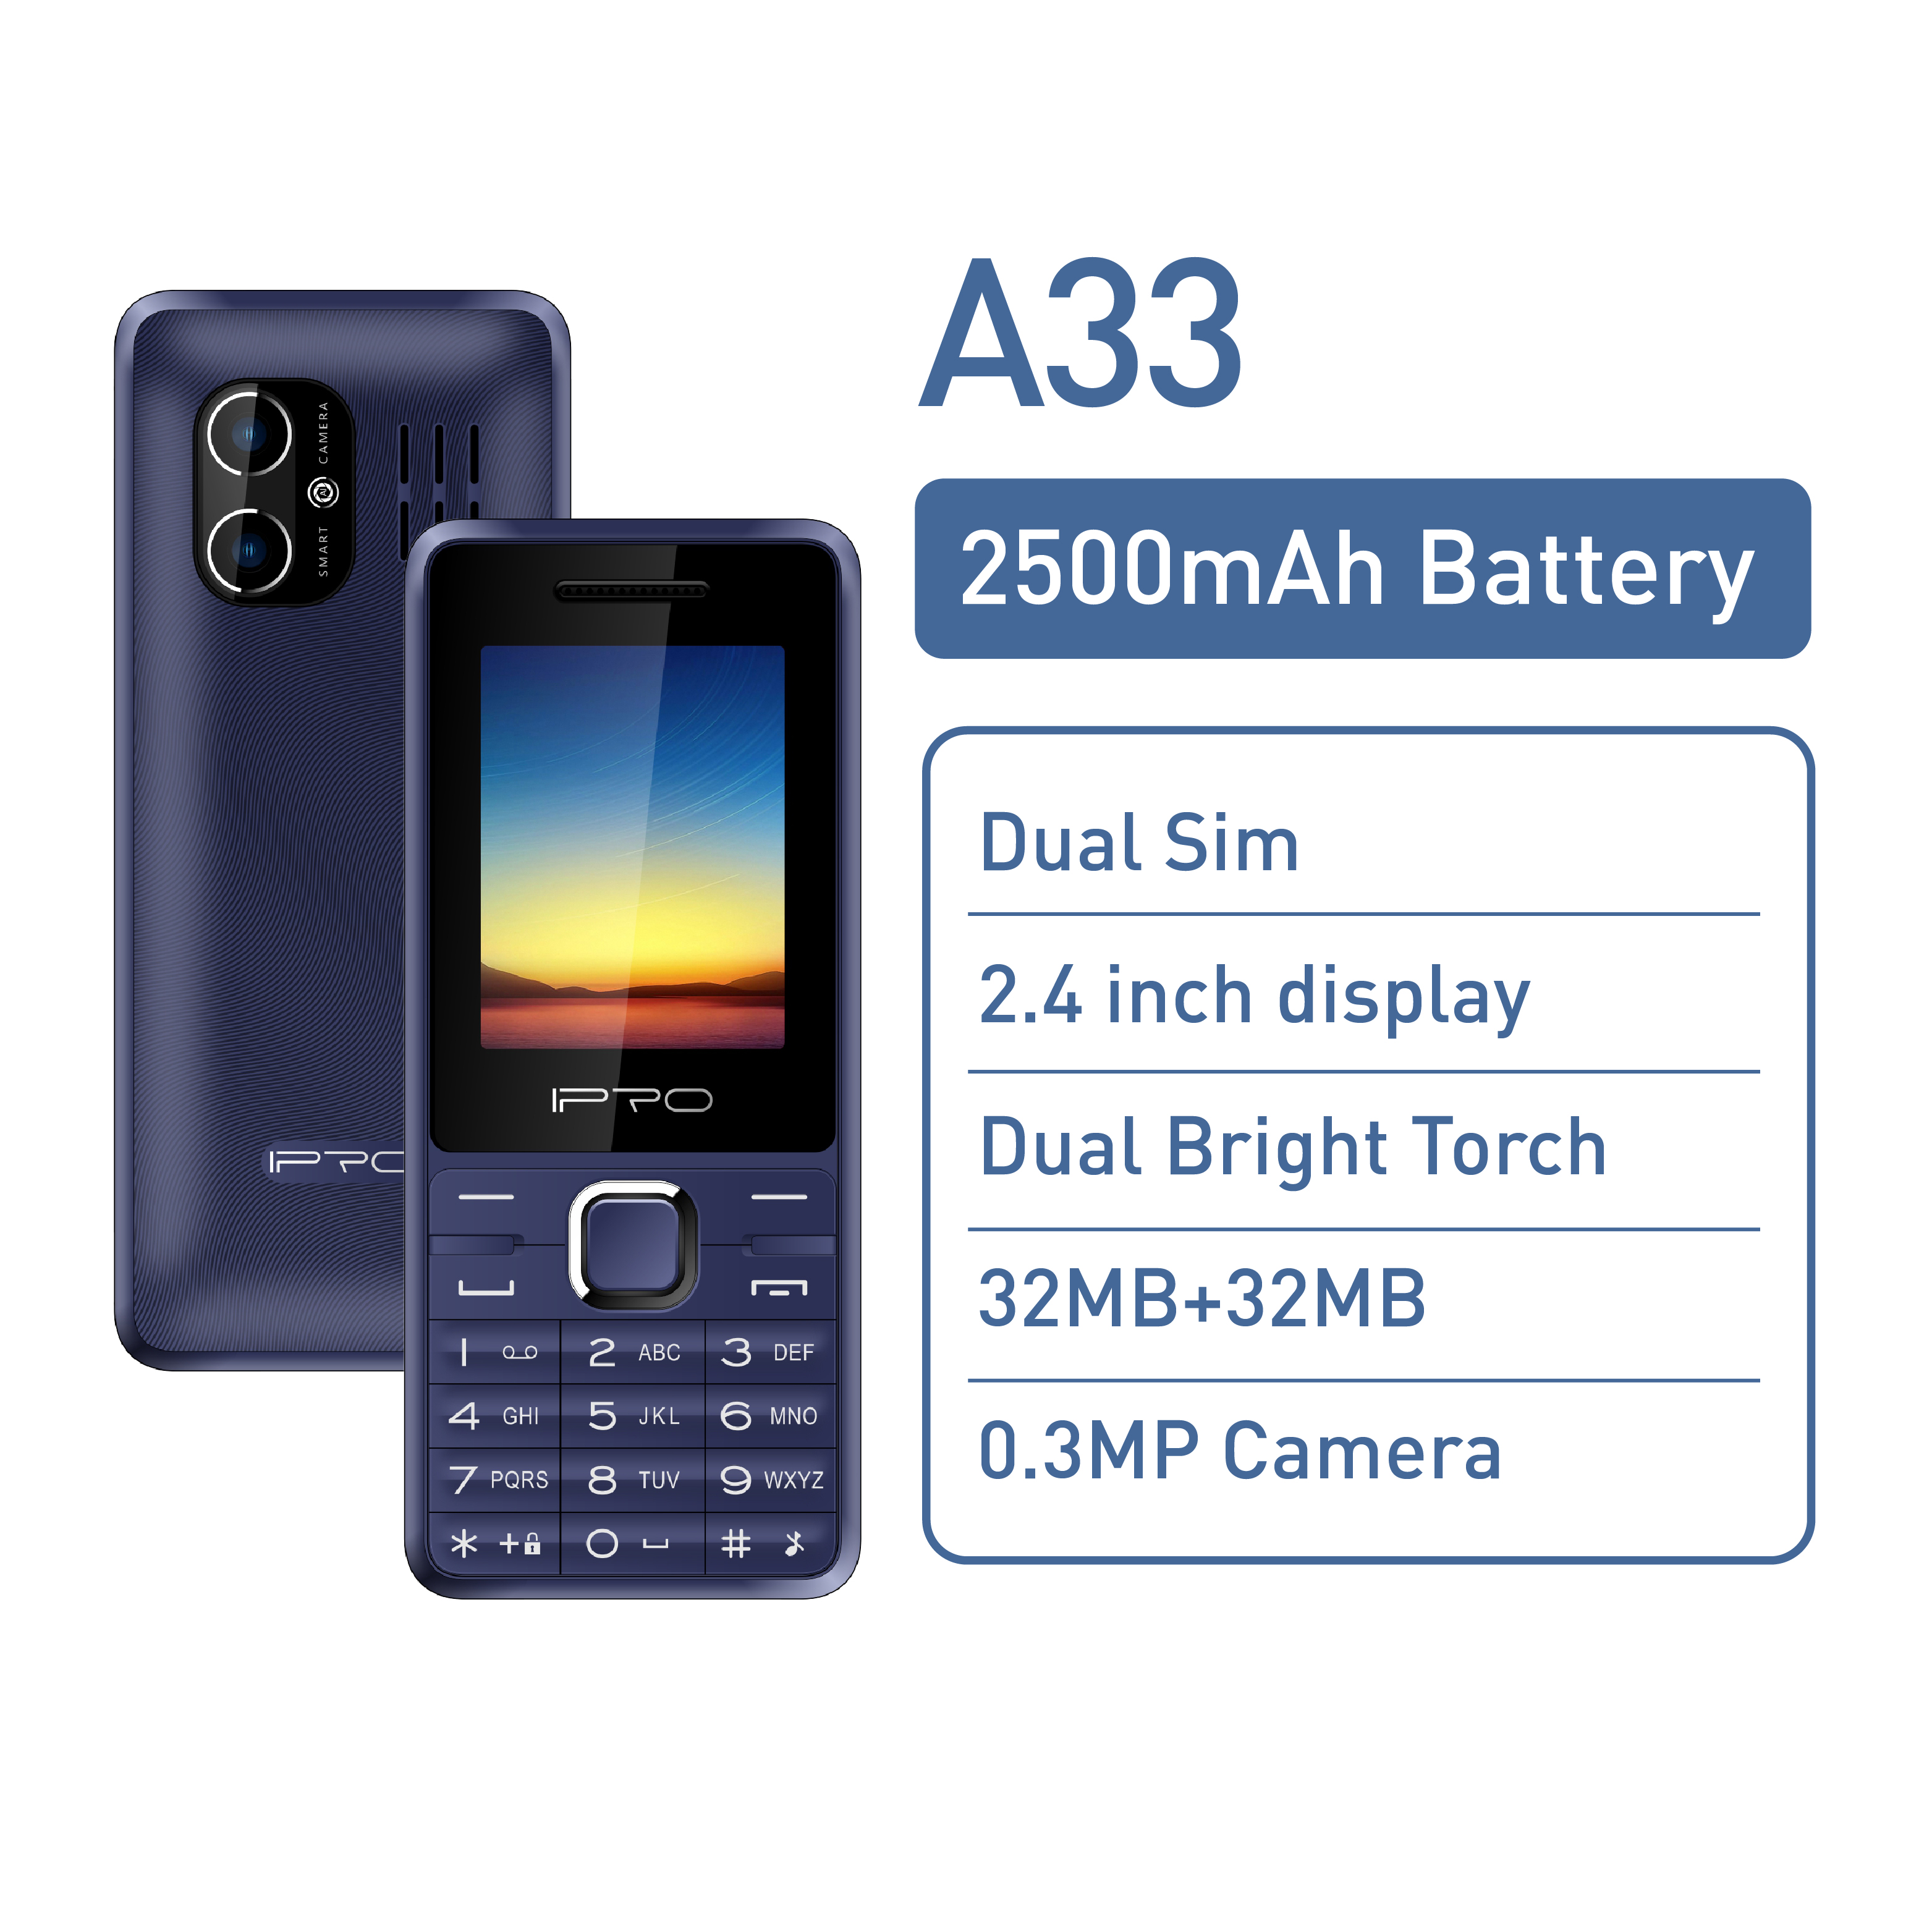 New product recommendation IPRO A33 2500mAh large capacity battery feature phone 2.4 inch dual SIM 2G feature phone